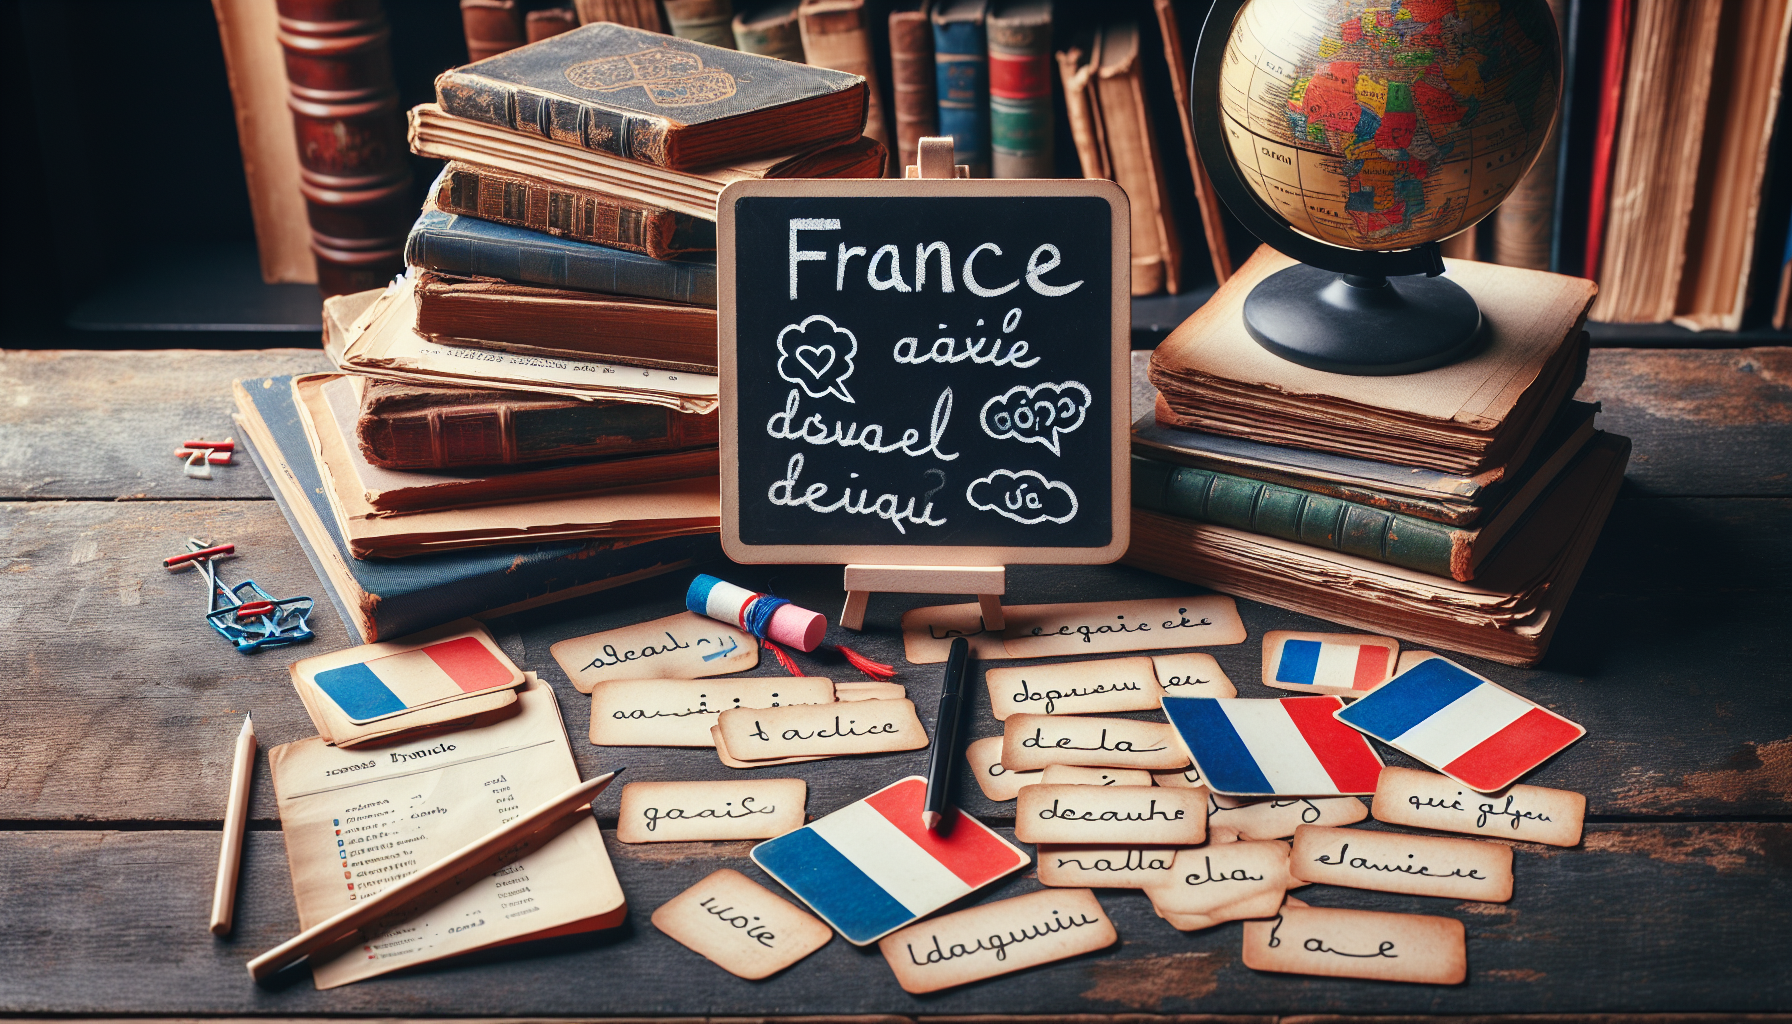 French language learning materials